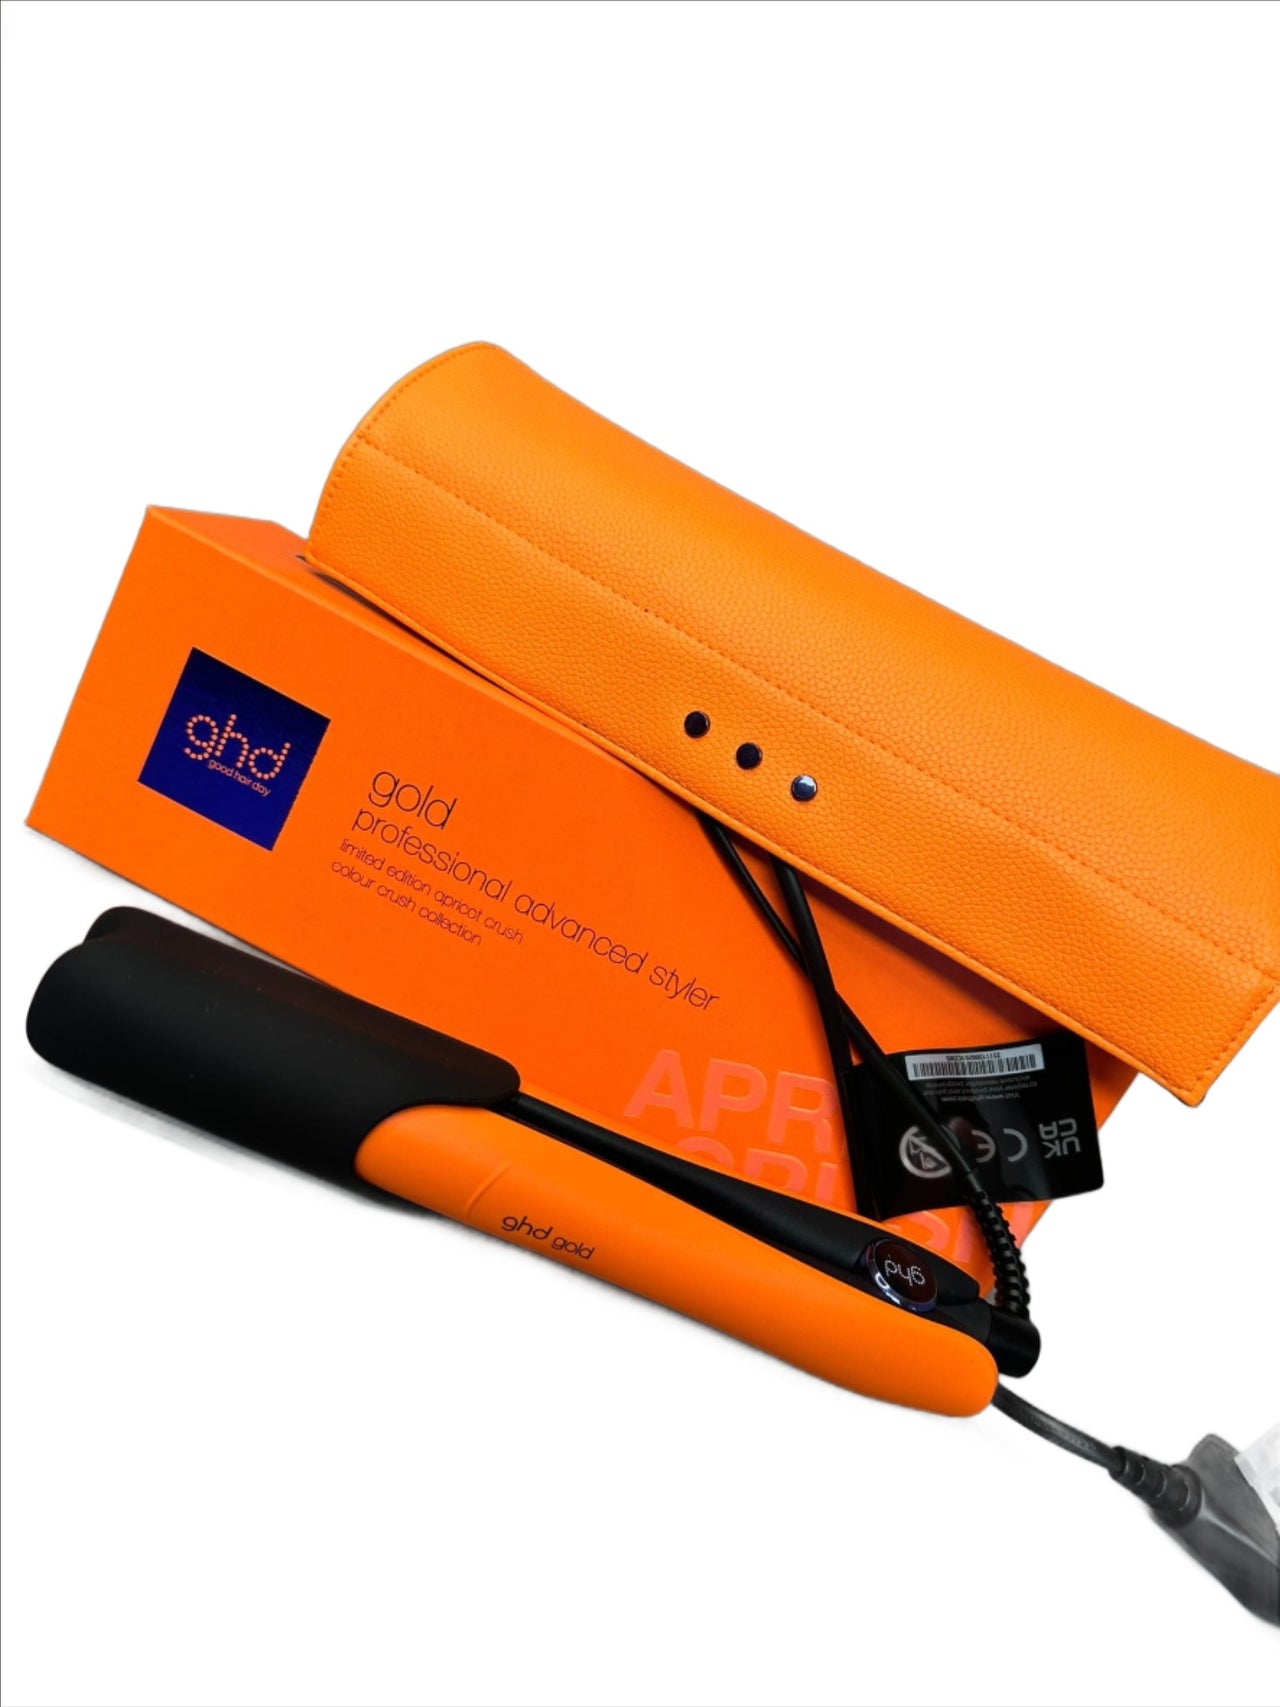 ghd in apricot